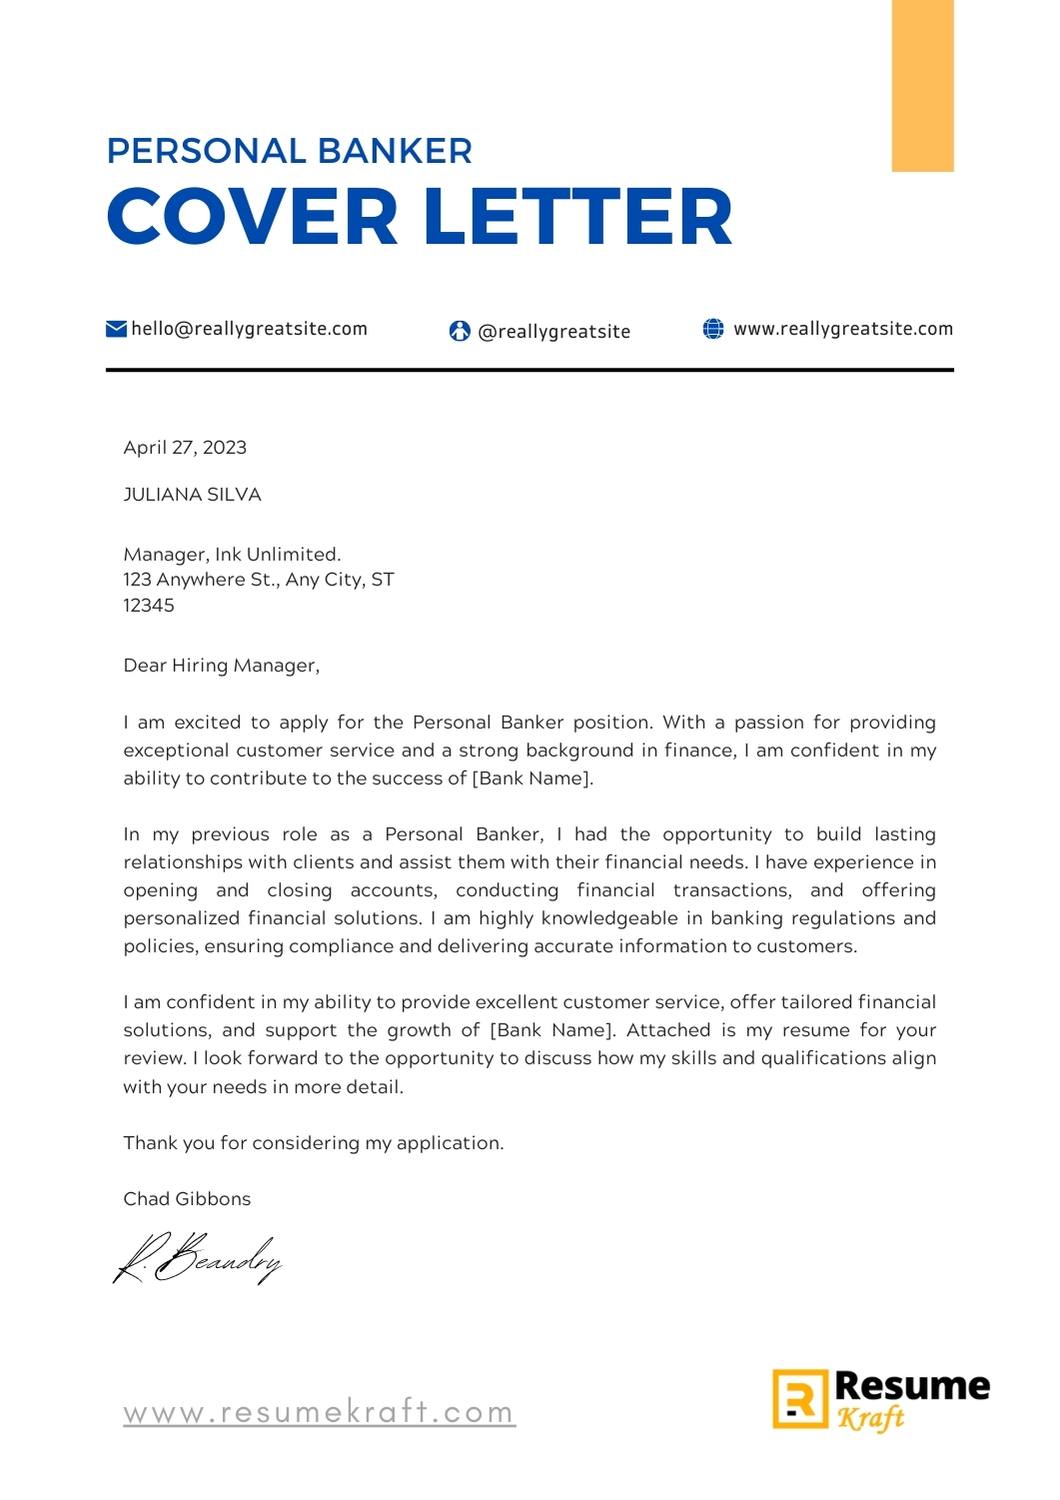 cover letter as a banker